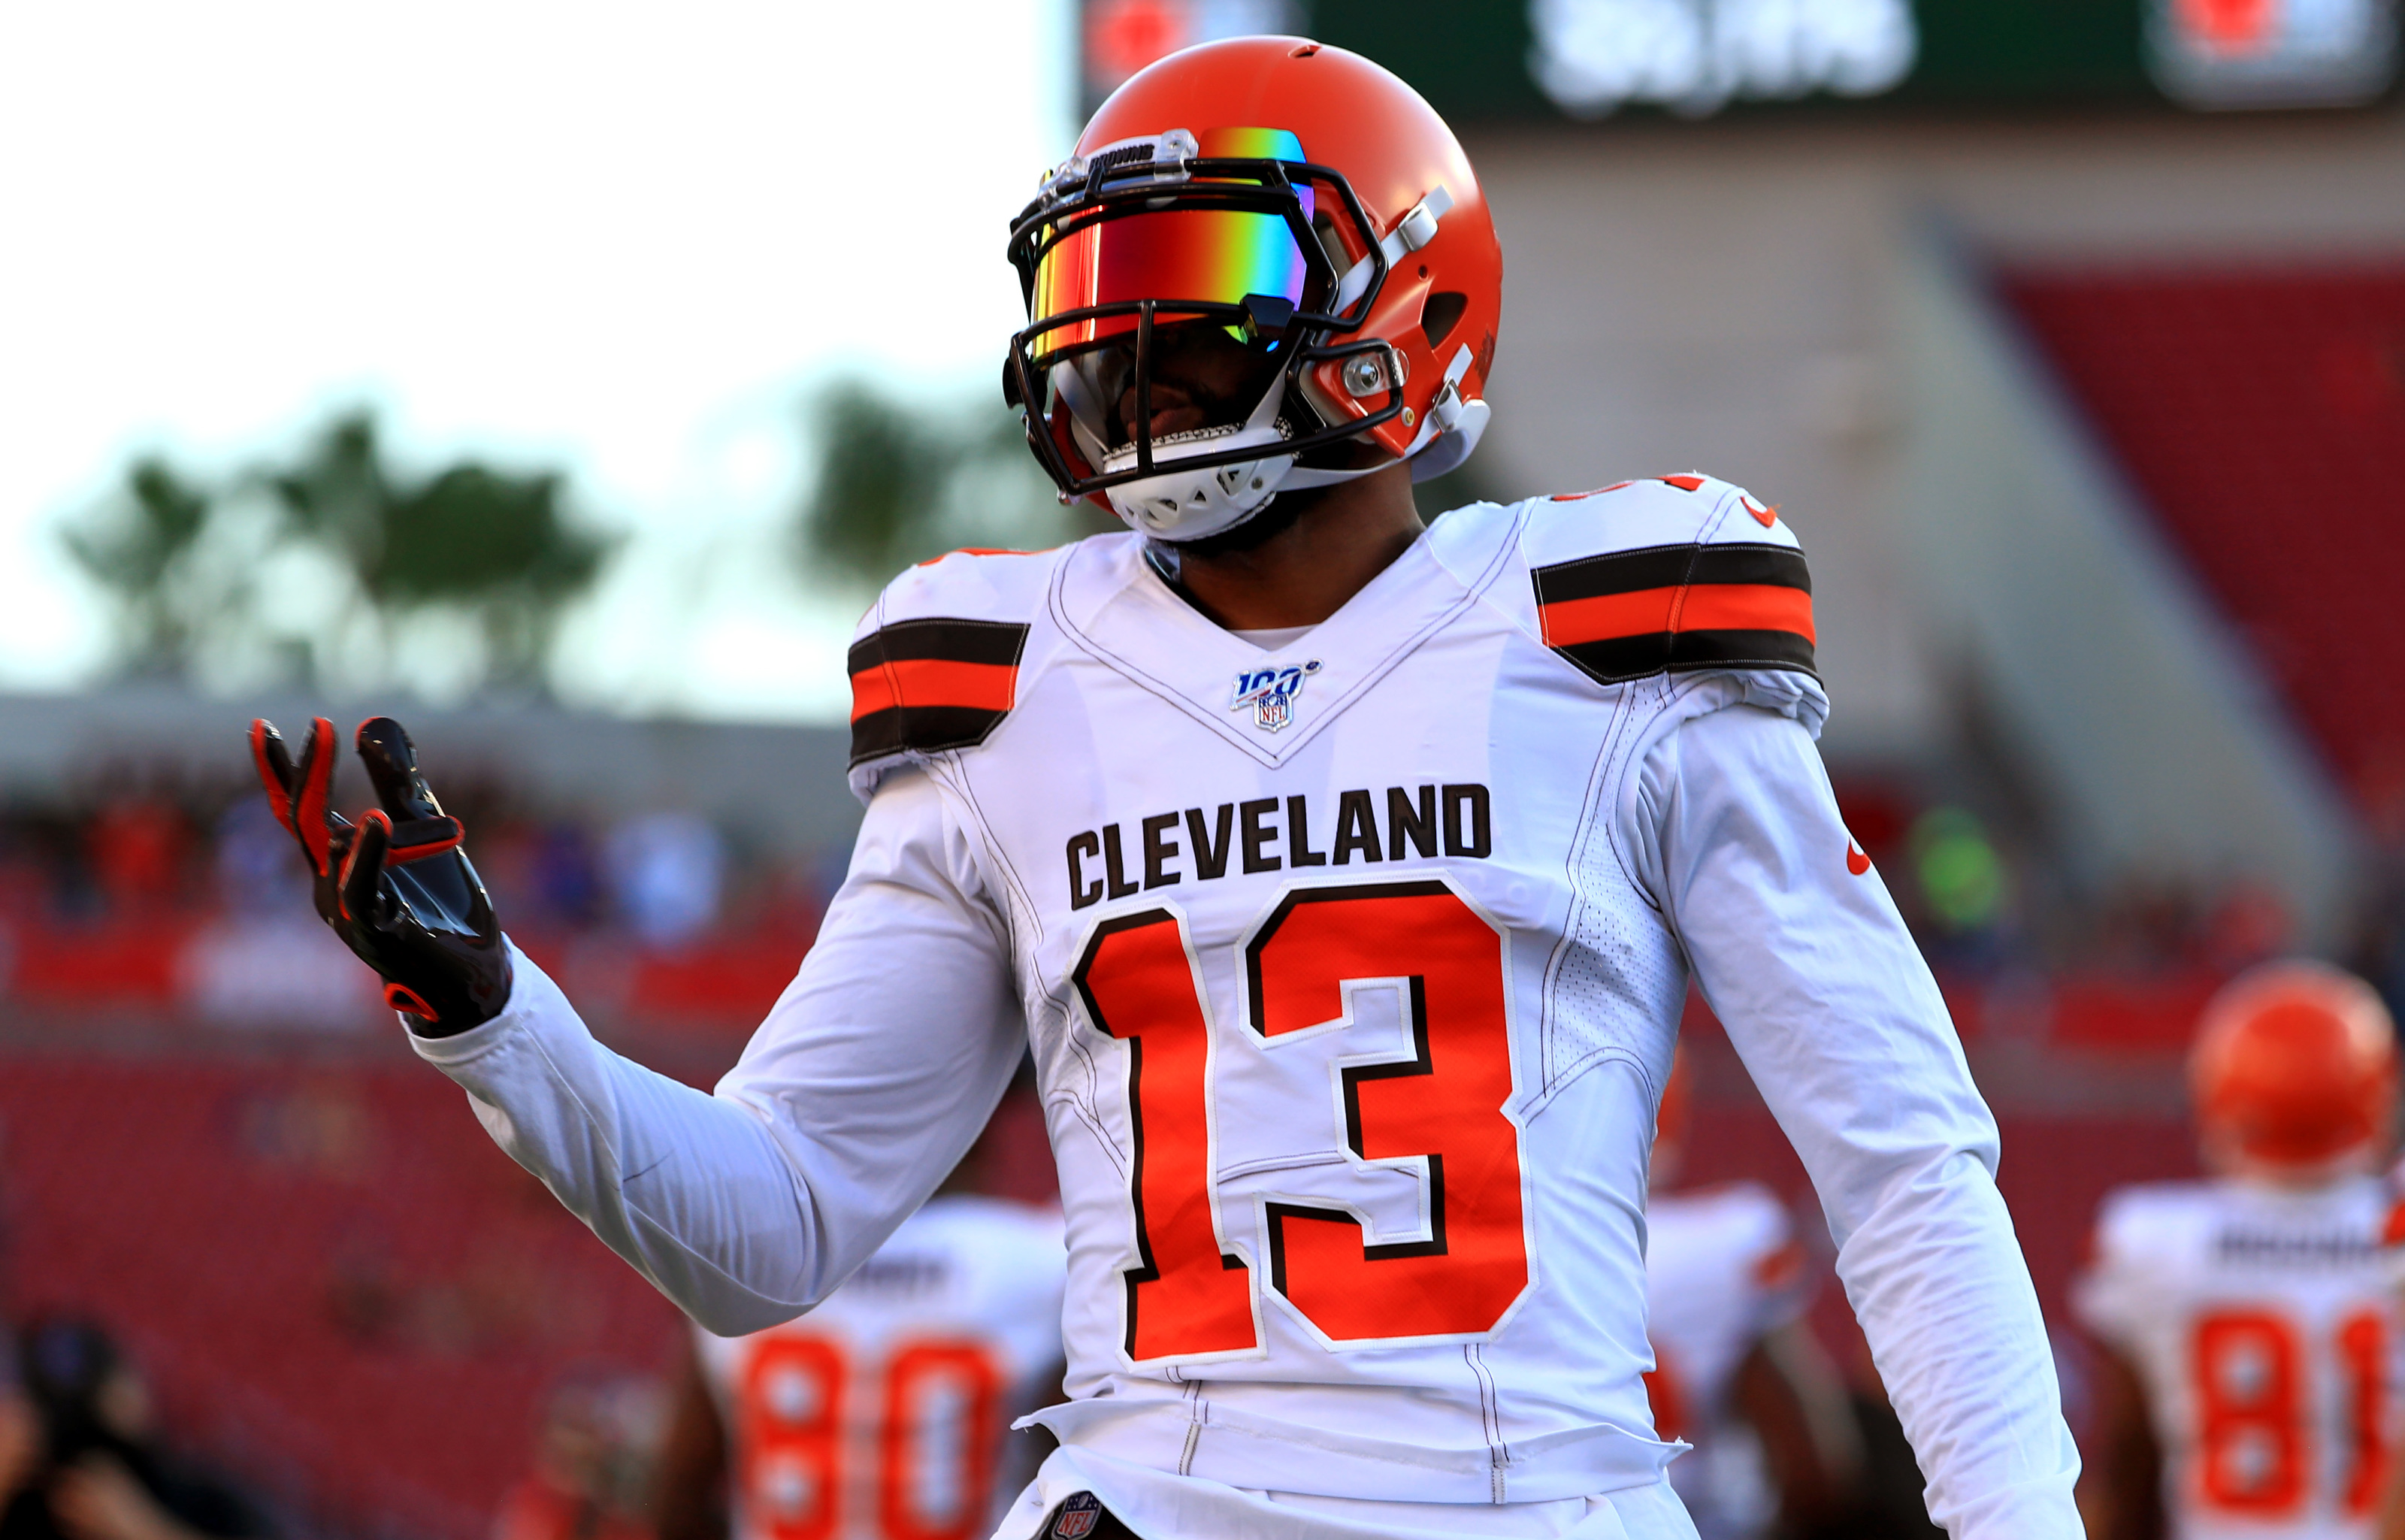 Cleveland Browns: Odell Beckham Jr. practicing brings sigh of relief